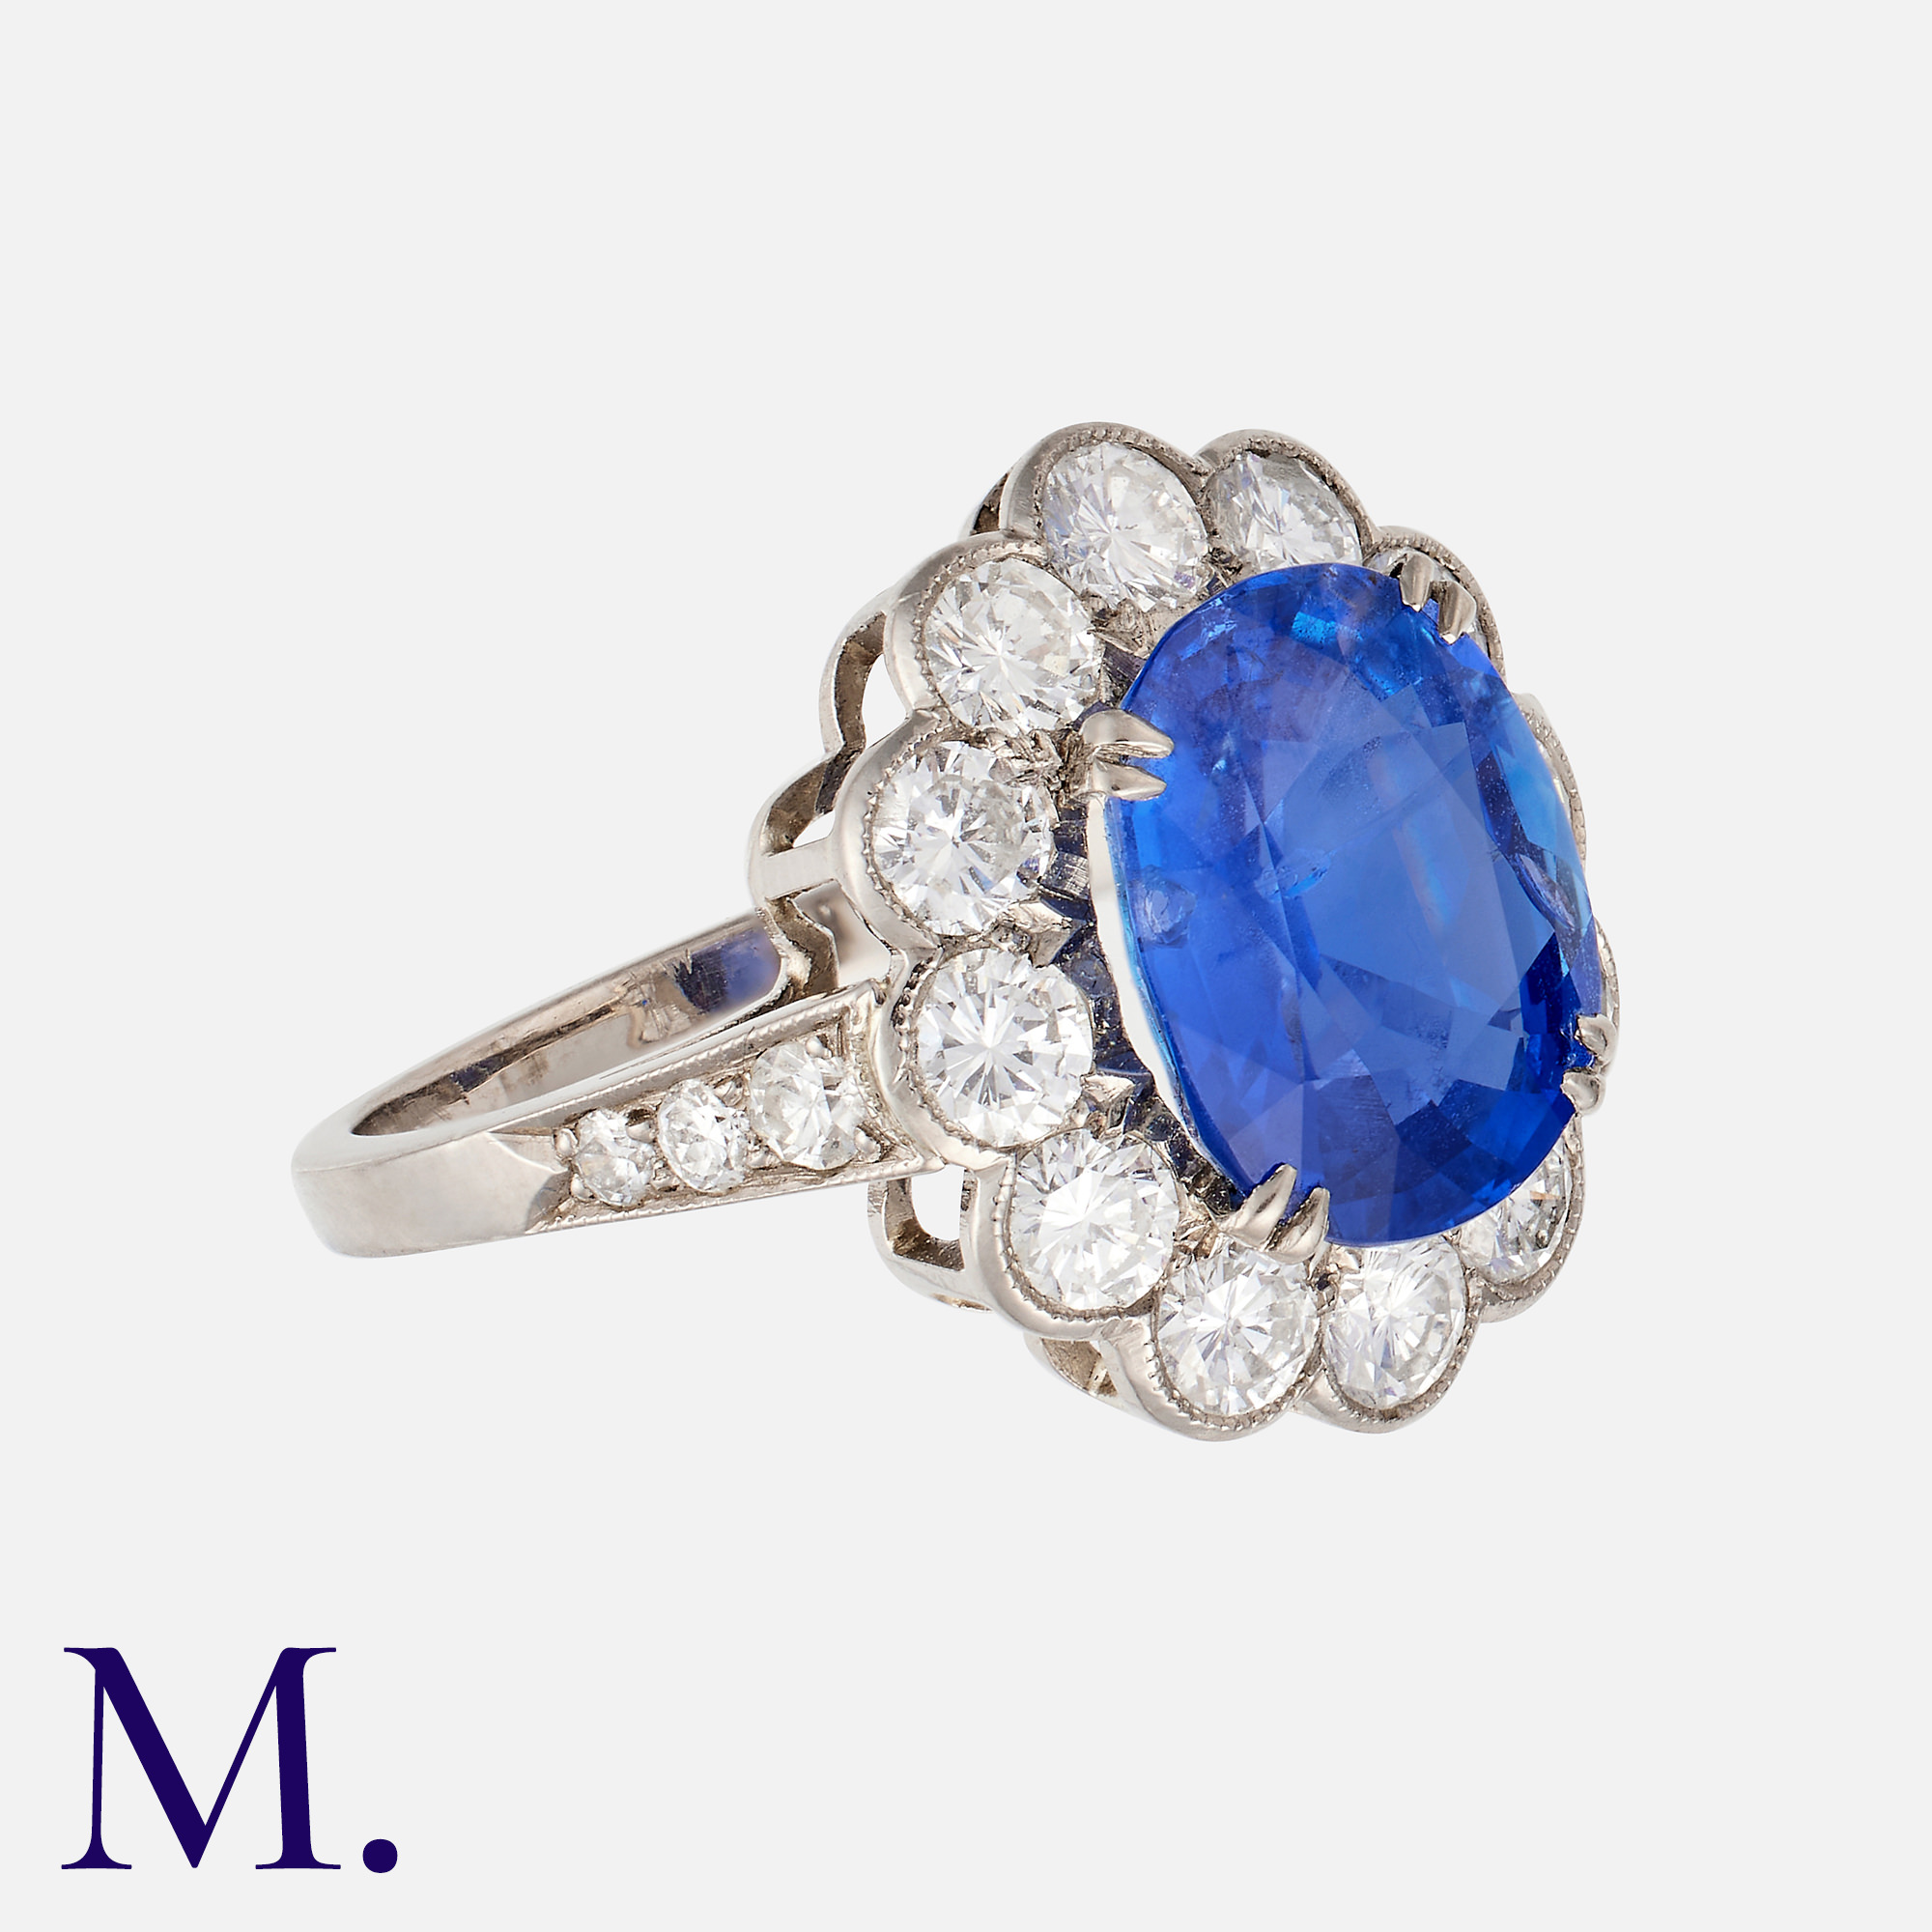 A Burma No Heat Sapphire And Diamond Cluster Ring in platinum, set with a principal blue sapphire of - Image 2 of 2